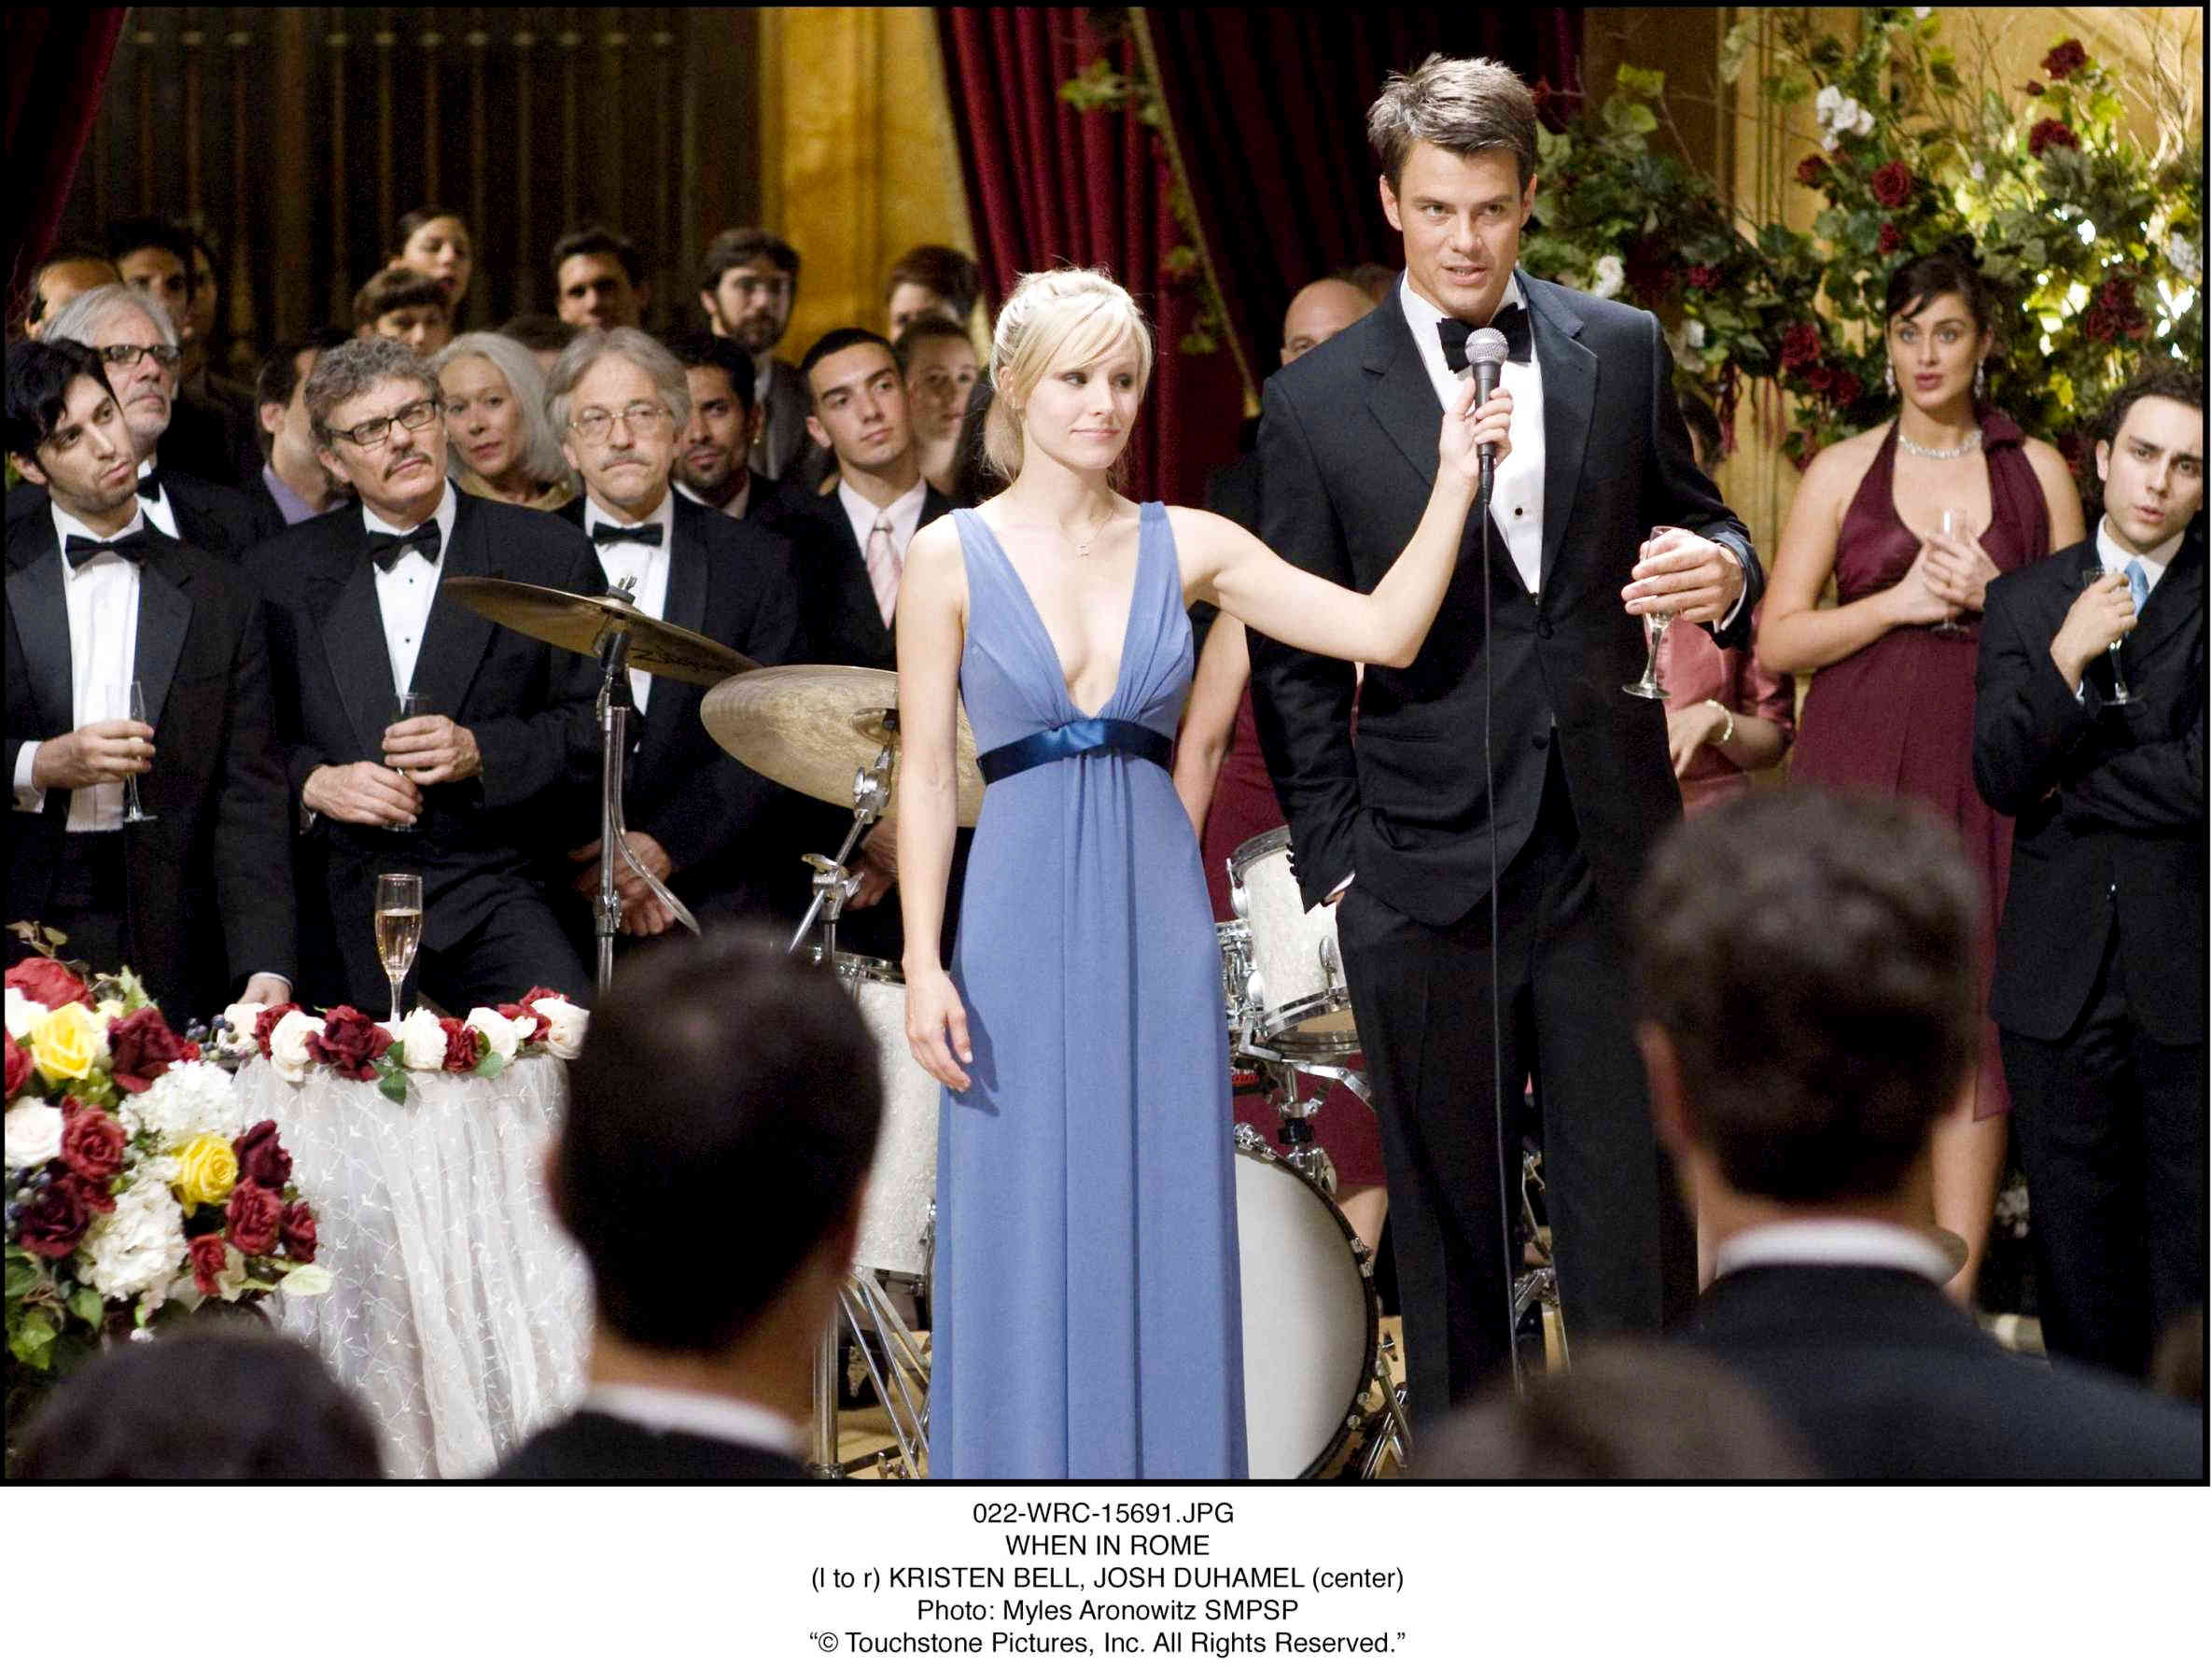 Kristen Bell stars as Beth Harper and Josh Duhamel stars as Nick Beamon in Walt Disney Pictures' When in Rome (2010). Photo credit by Myles Aronowitz.